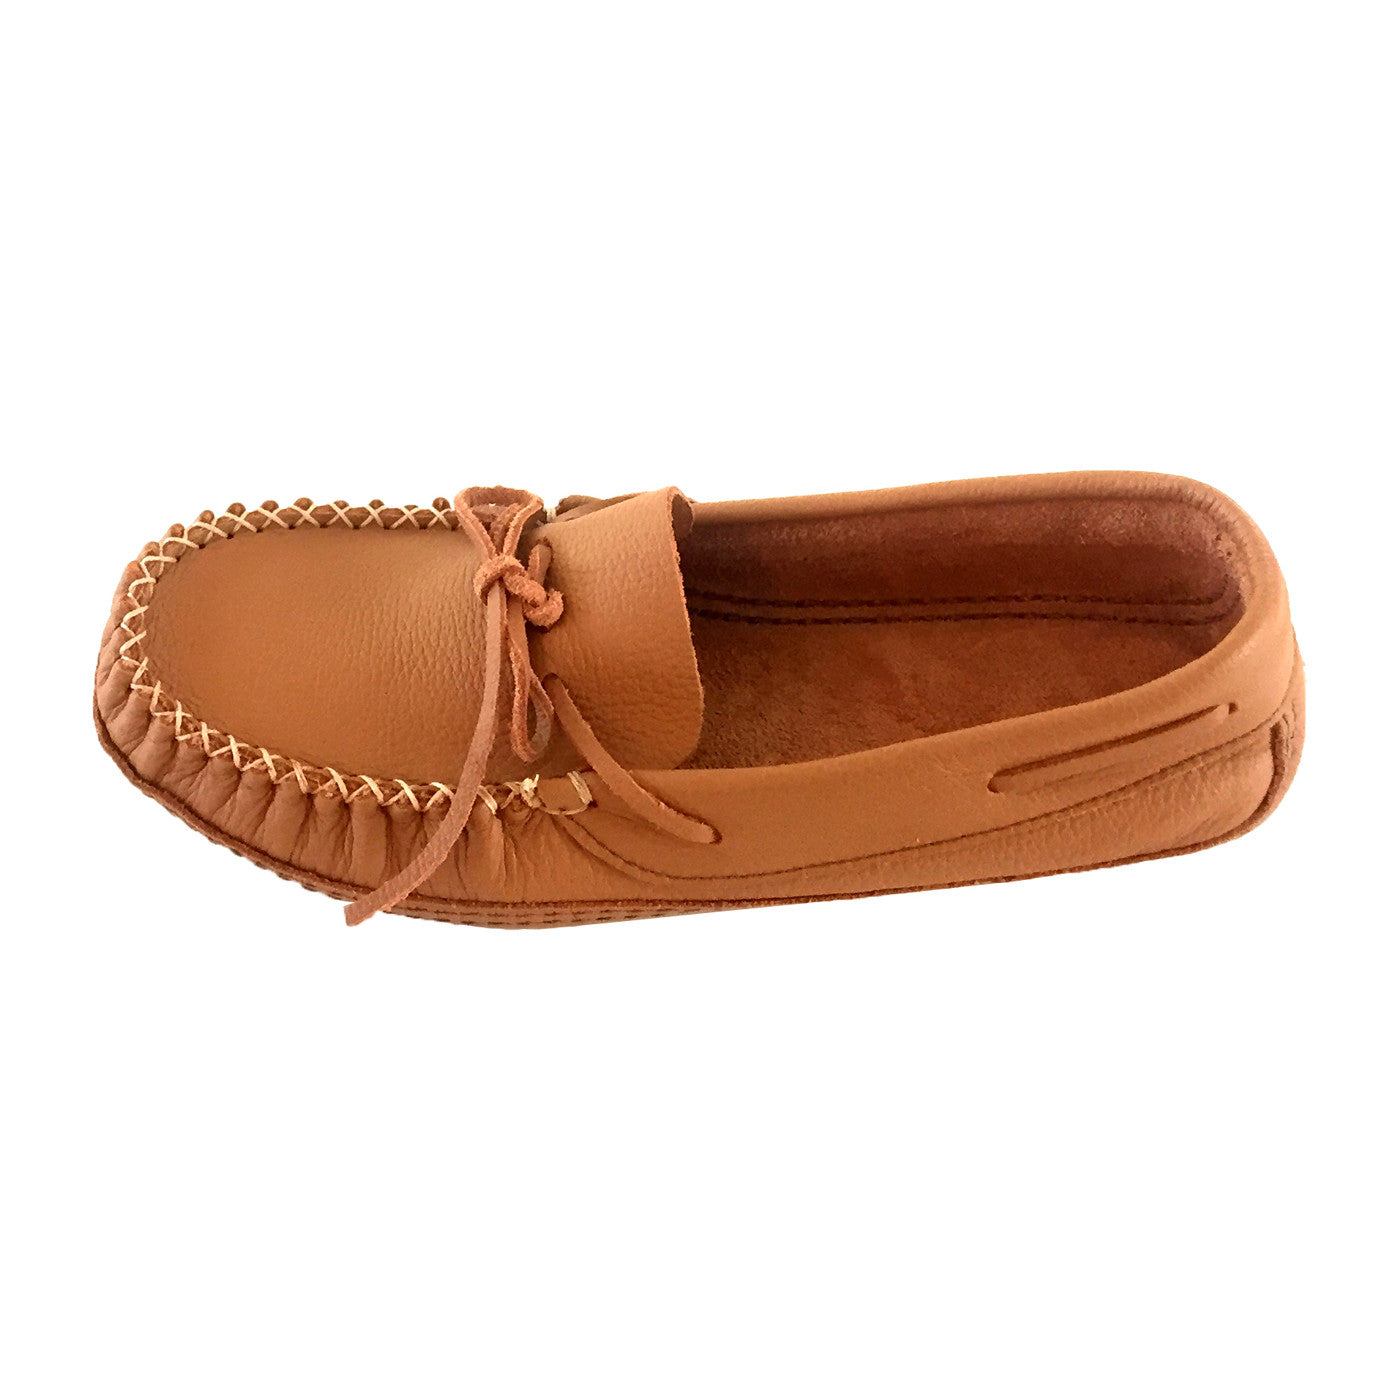 mens moccasin slippers size 14 wide